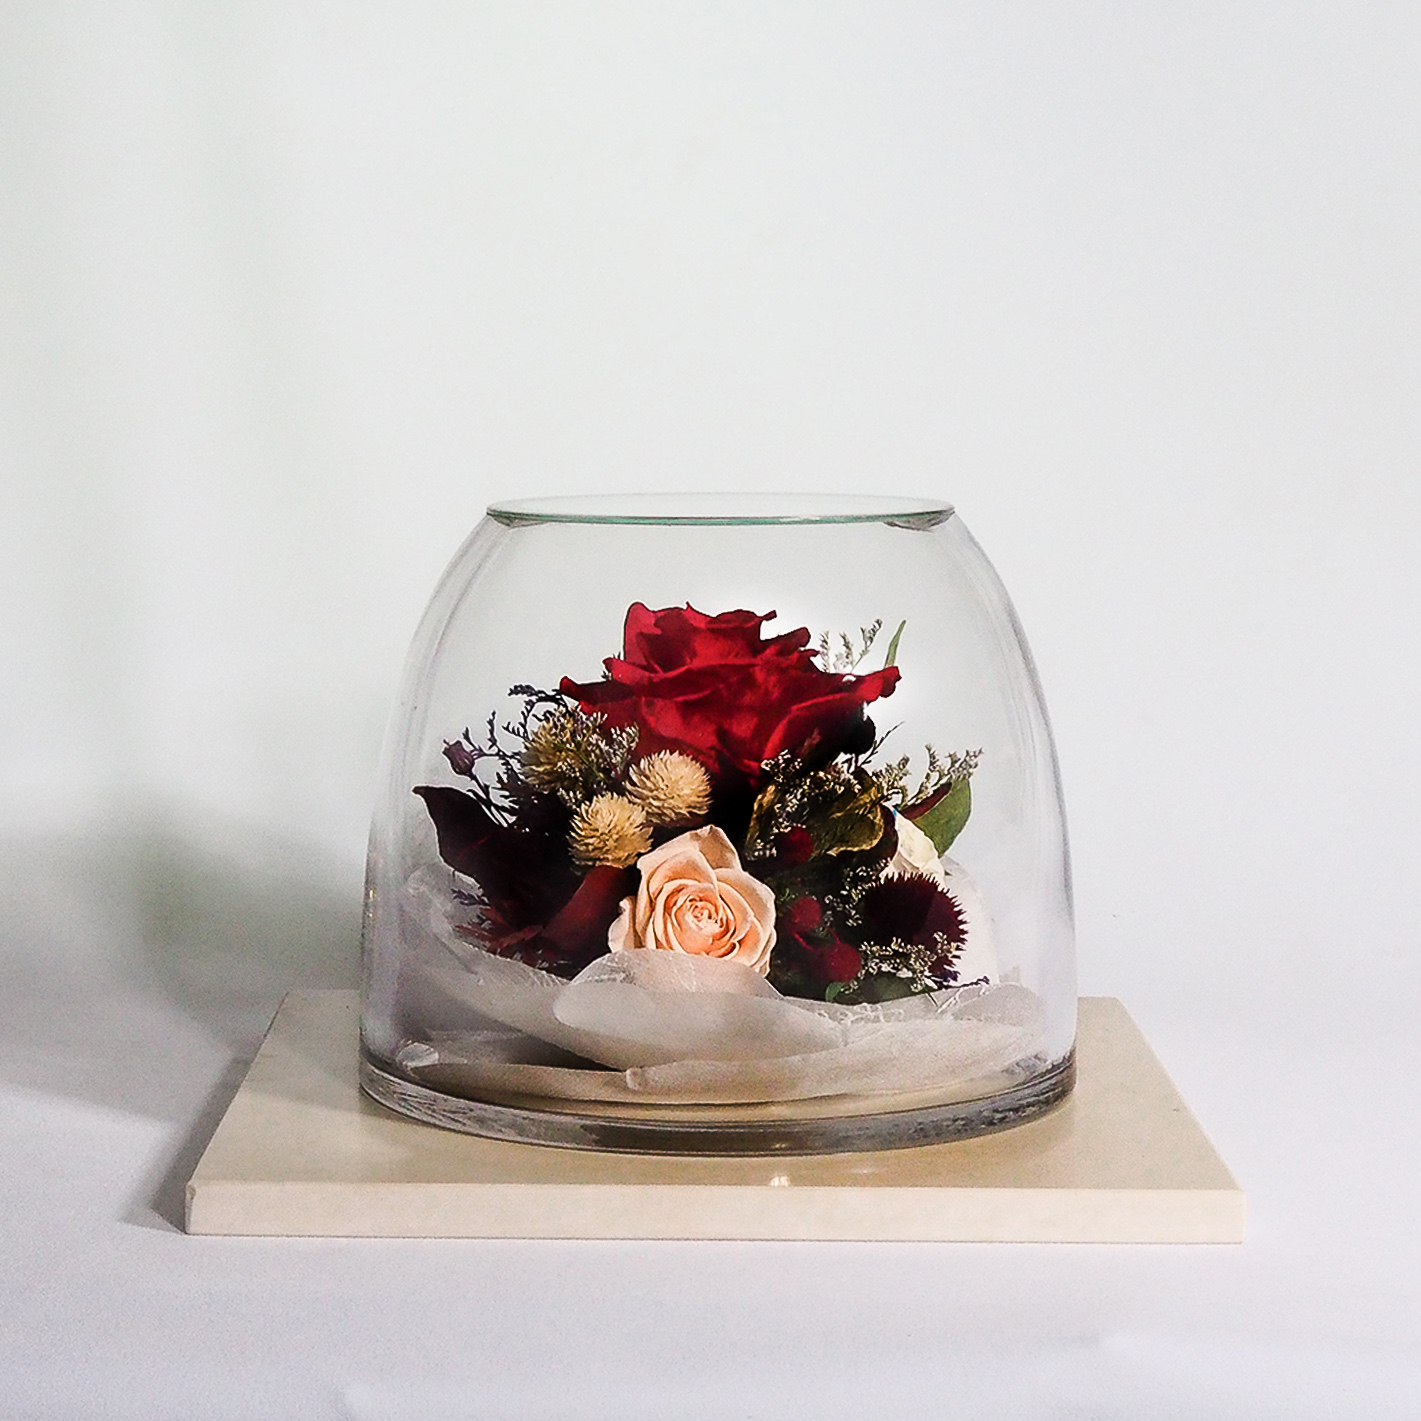 Preserved Flower Imported From Japan (Red-Ivery White-Pink Champagne)(67167). For Valentines, Gift, Home Decoration, Anniversary and present for your love ones. 100% natural flower.